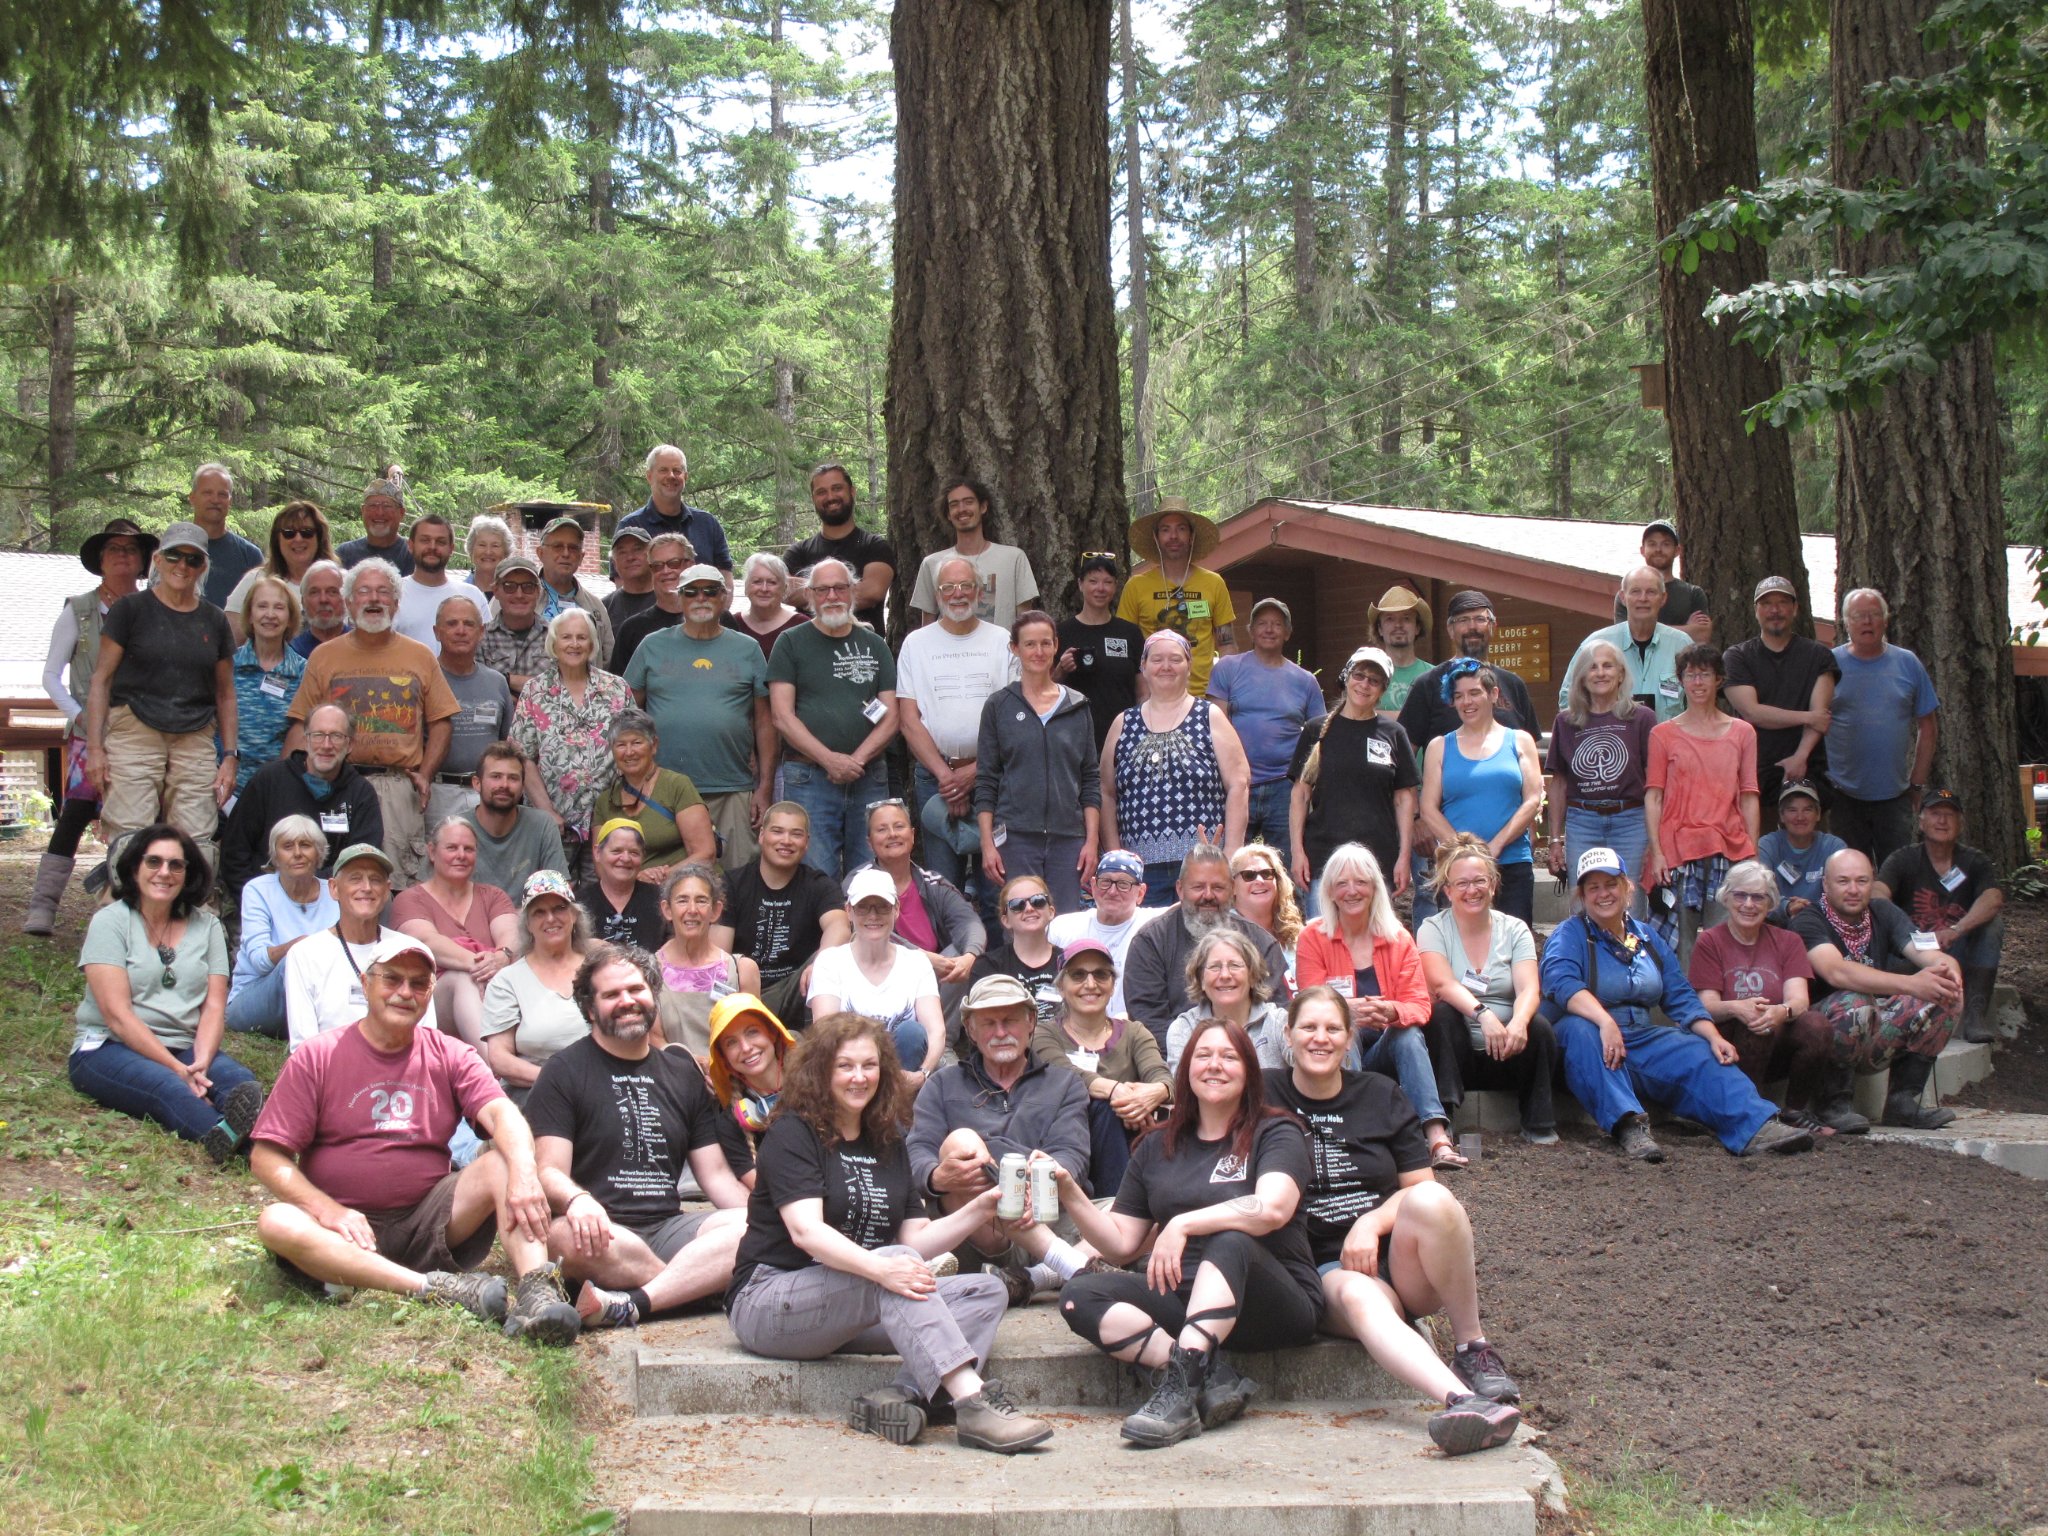 Group Photo from the July 2022 Stone Carving Symposium in Port Orchard WA